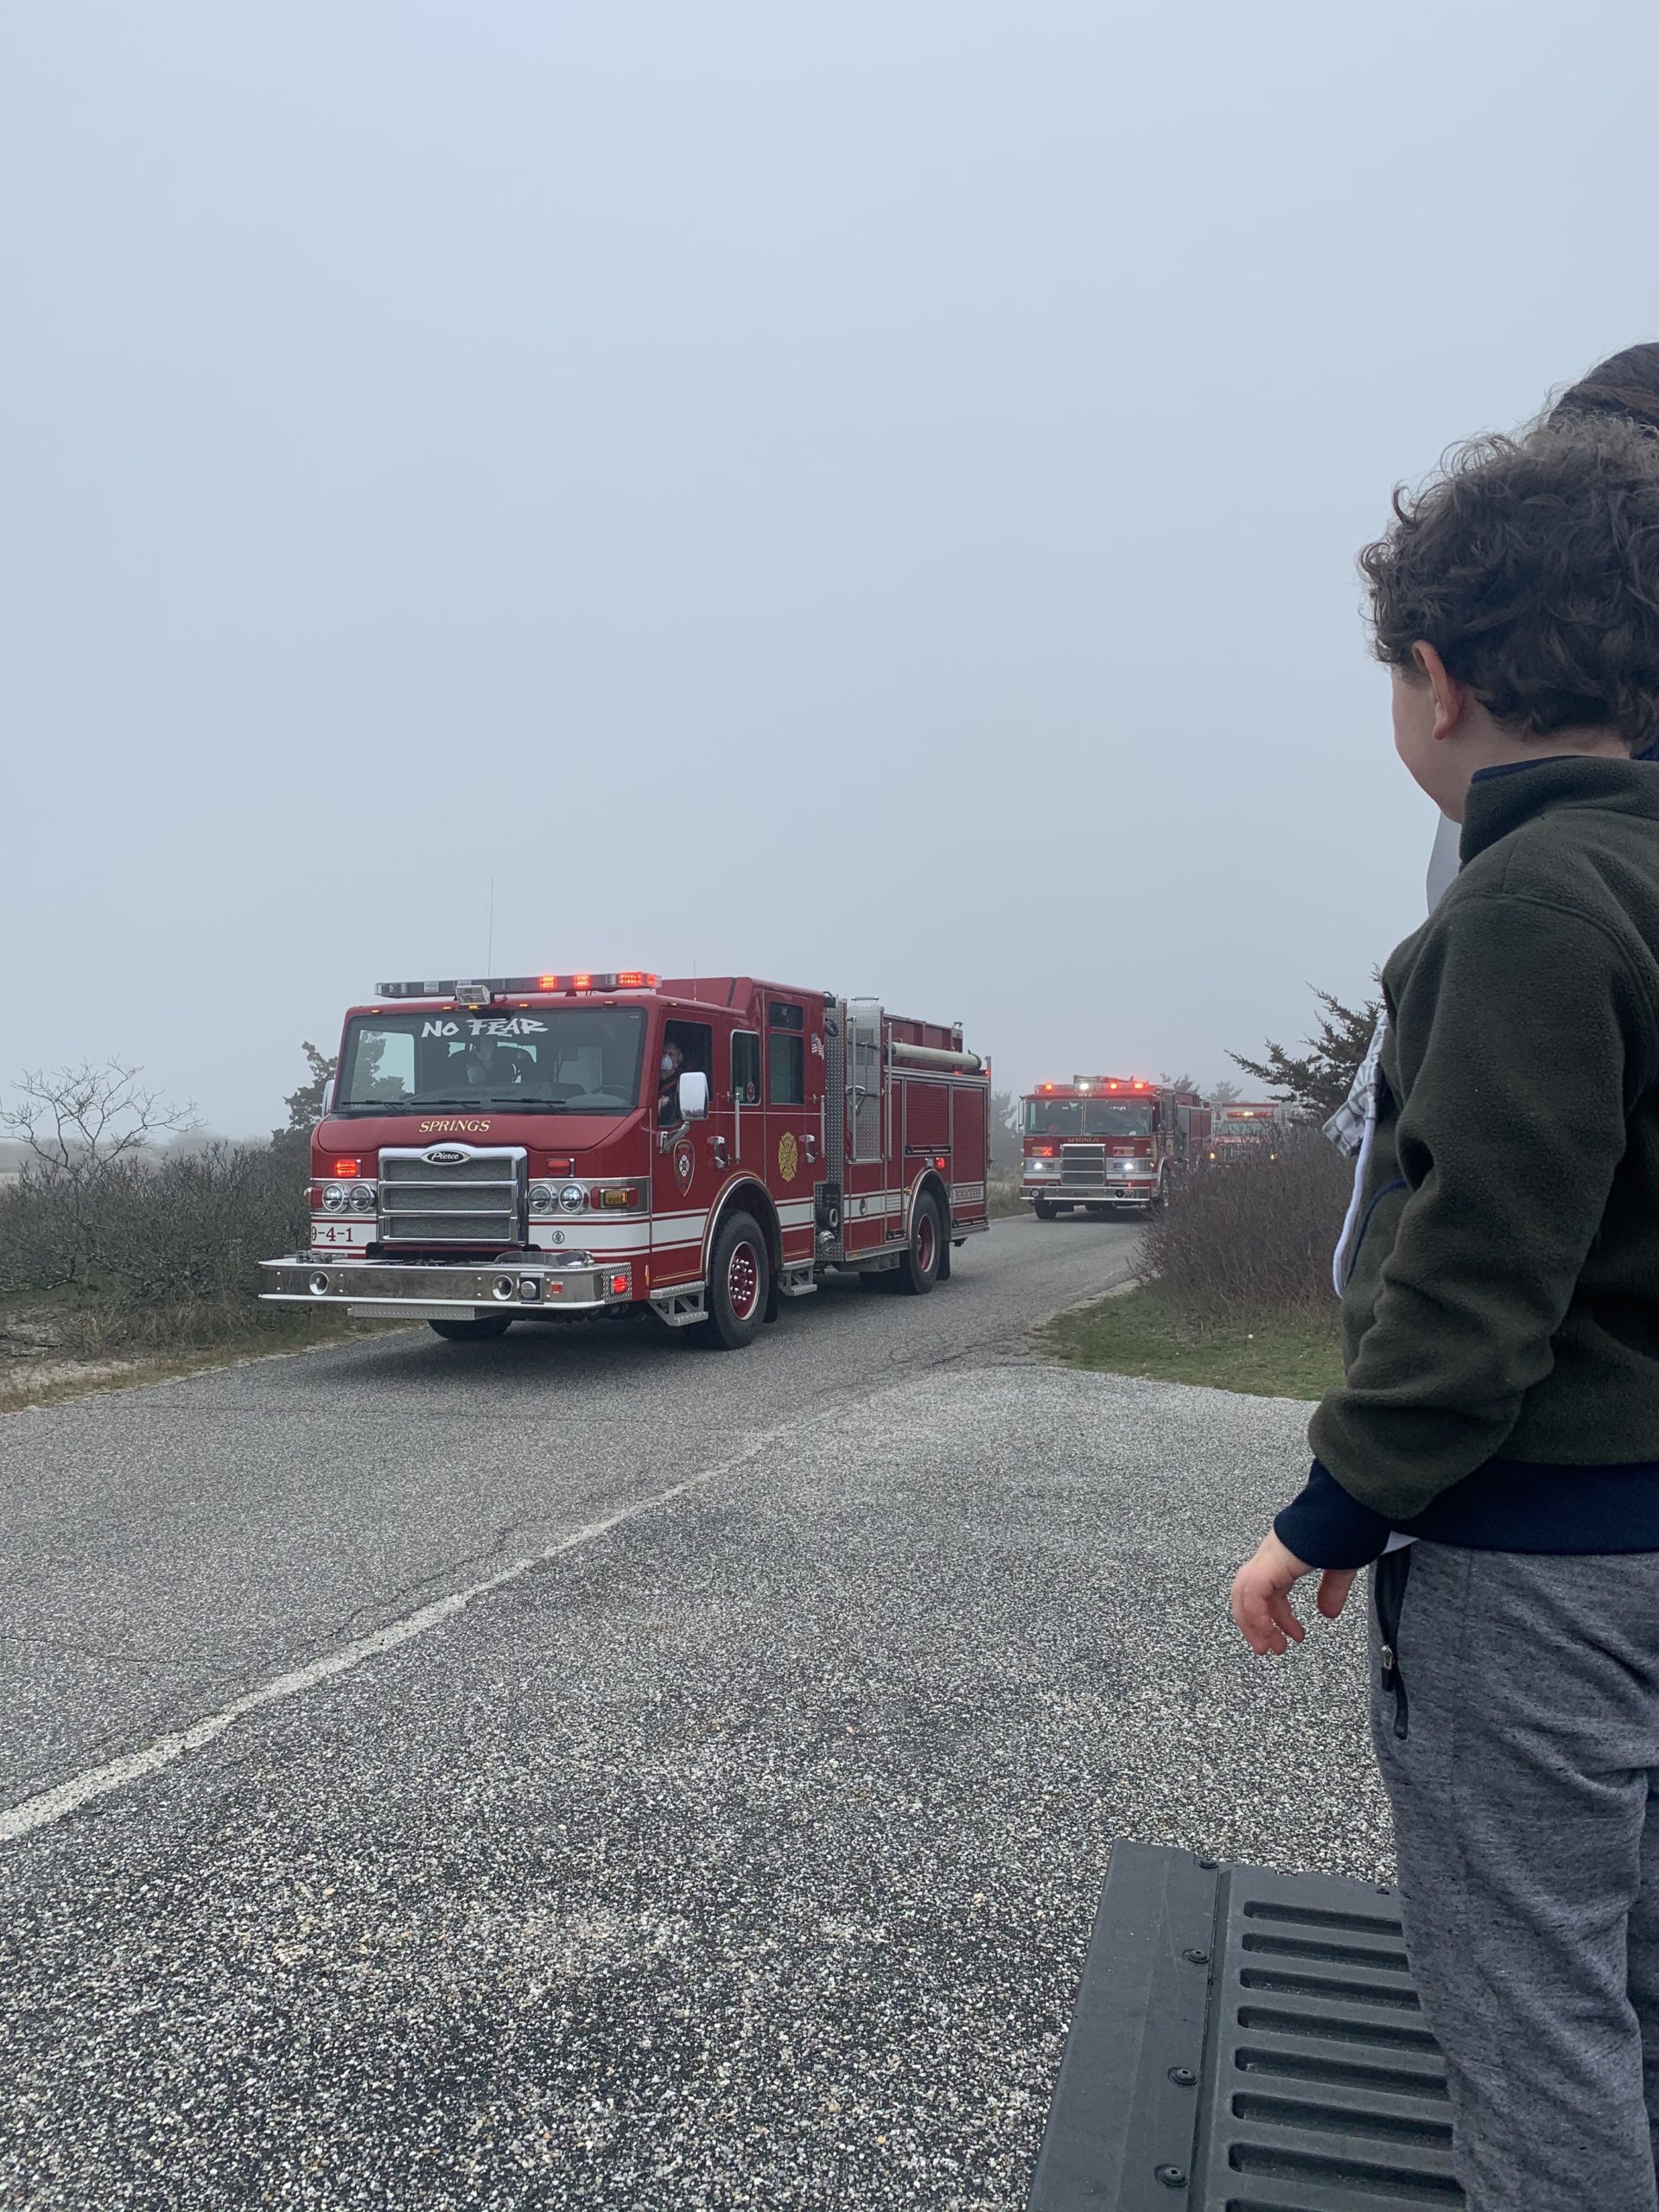 Volunteers with the Springs Fire Department lead a Spirit Drive at Maidstone Beach where students and families were encouraged to maintain social distance while waving to teachers and administrators. 